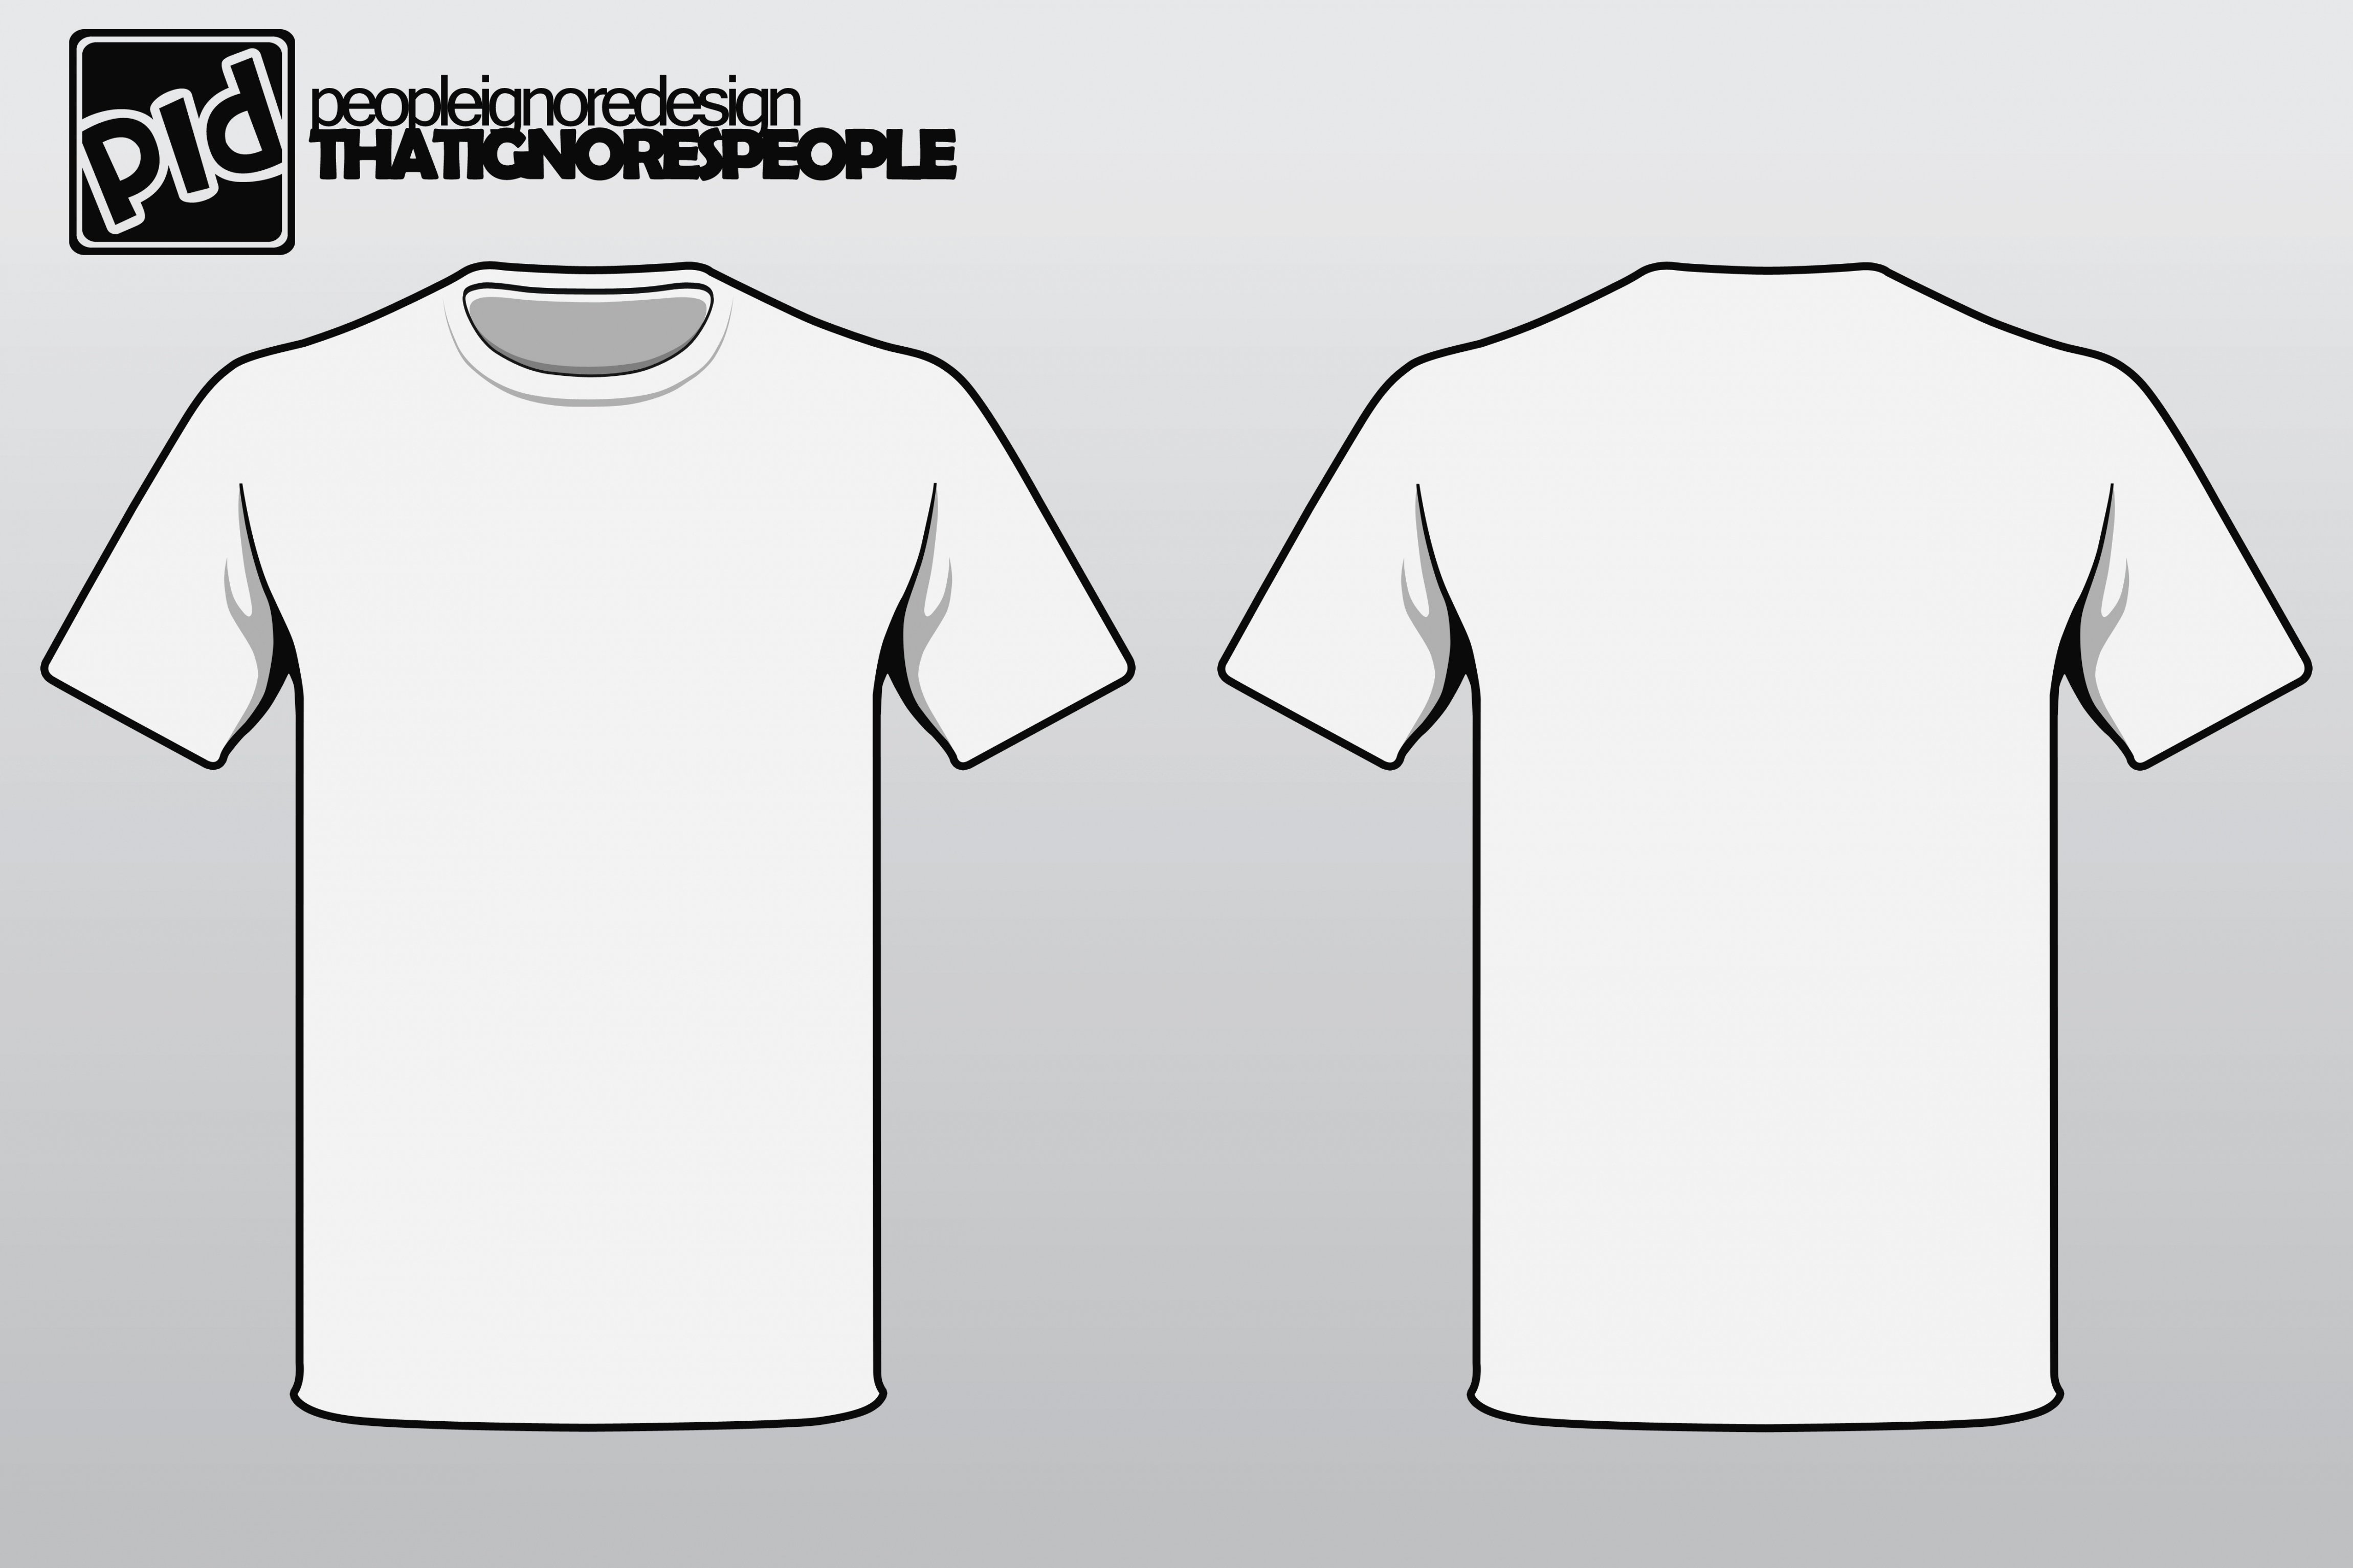 How To Make A Shirt Template In Photoshop - Best Design Idea